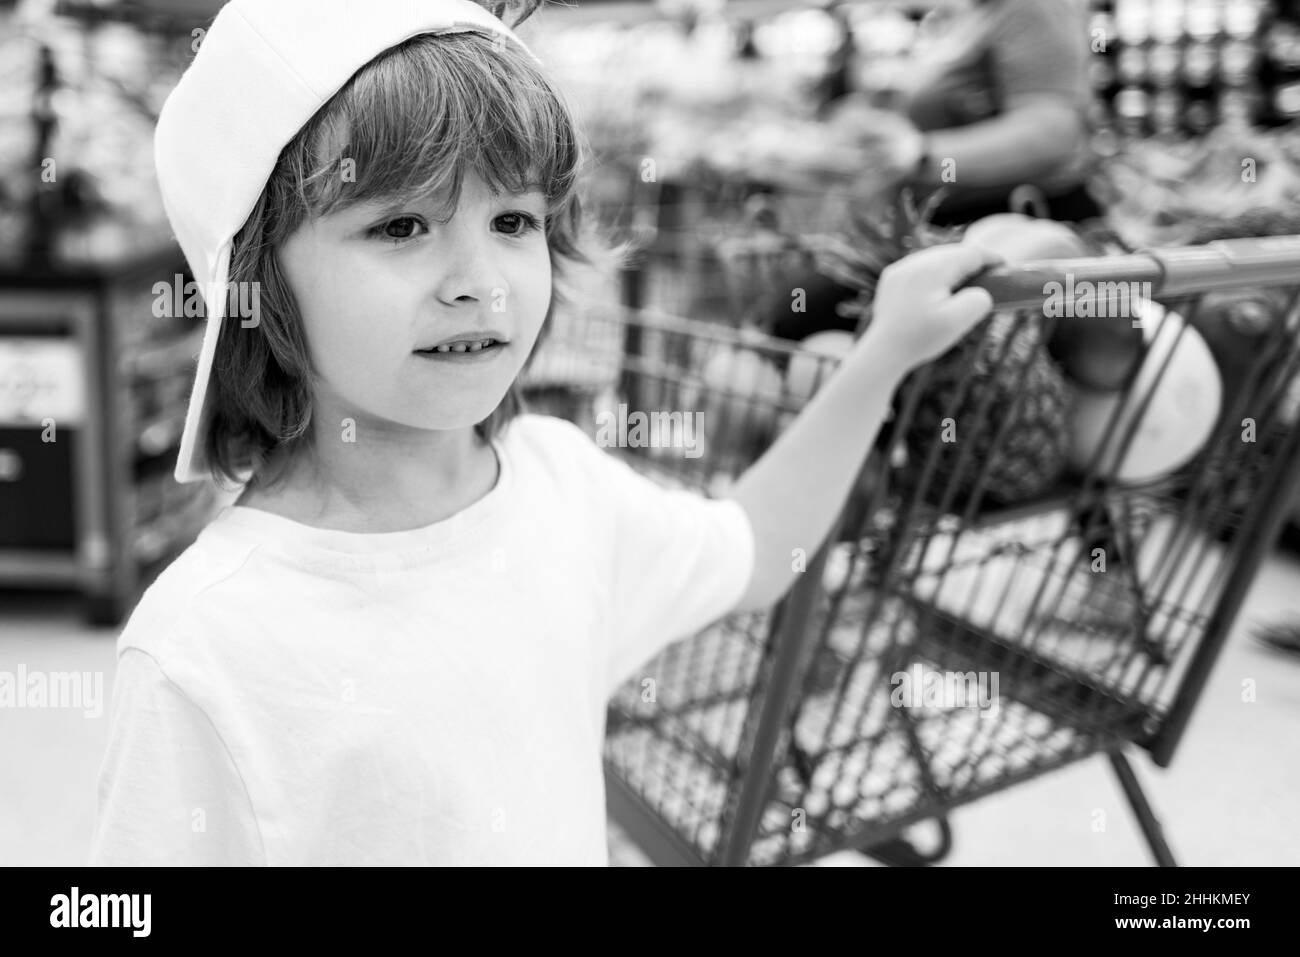 Sale, consumerism and people concept - happy little child with food in shopping cart at grocery store. Stock Photo